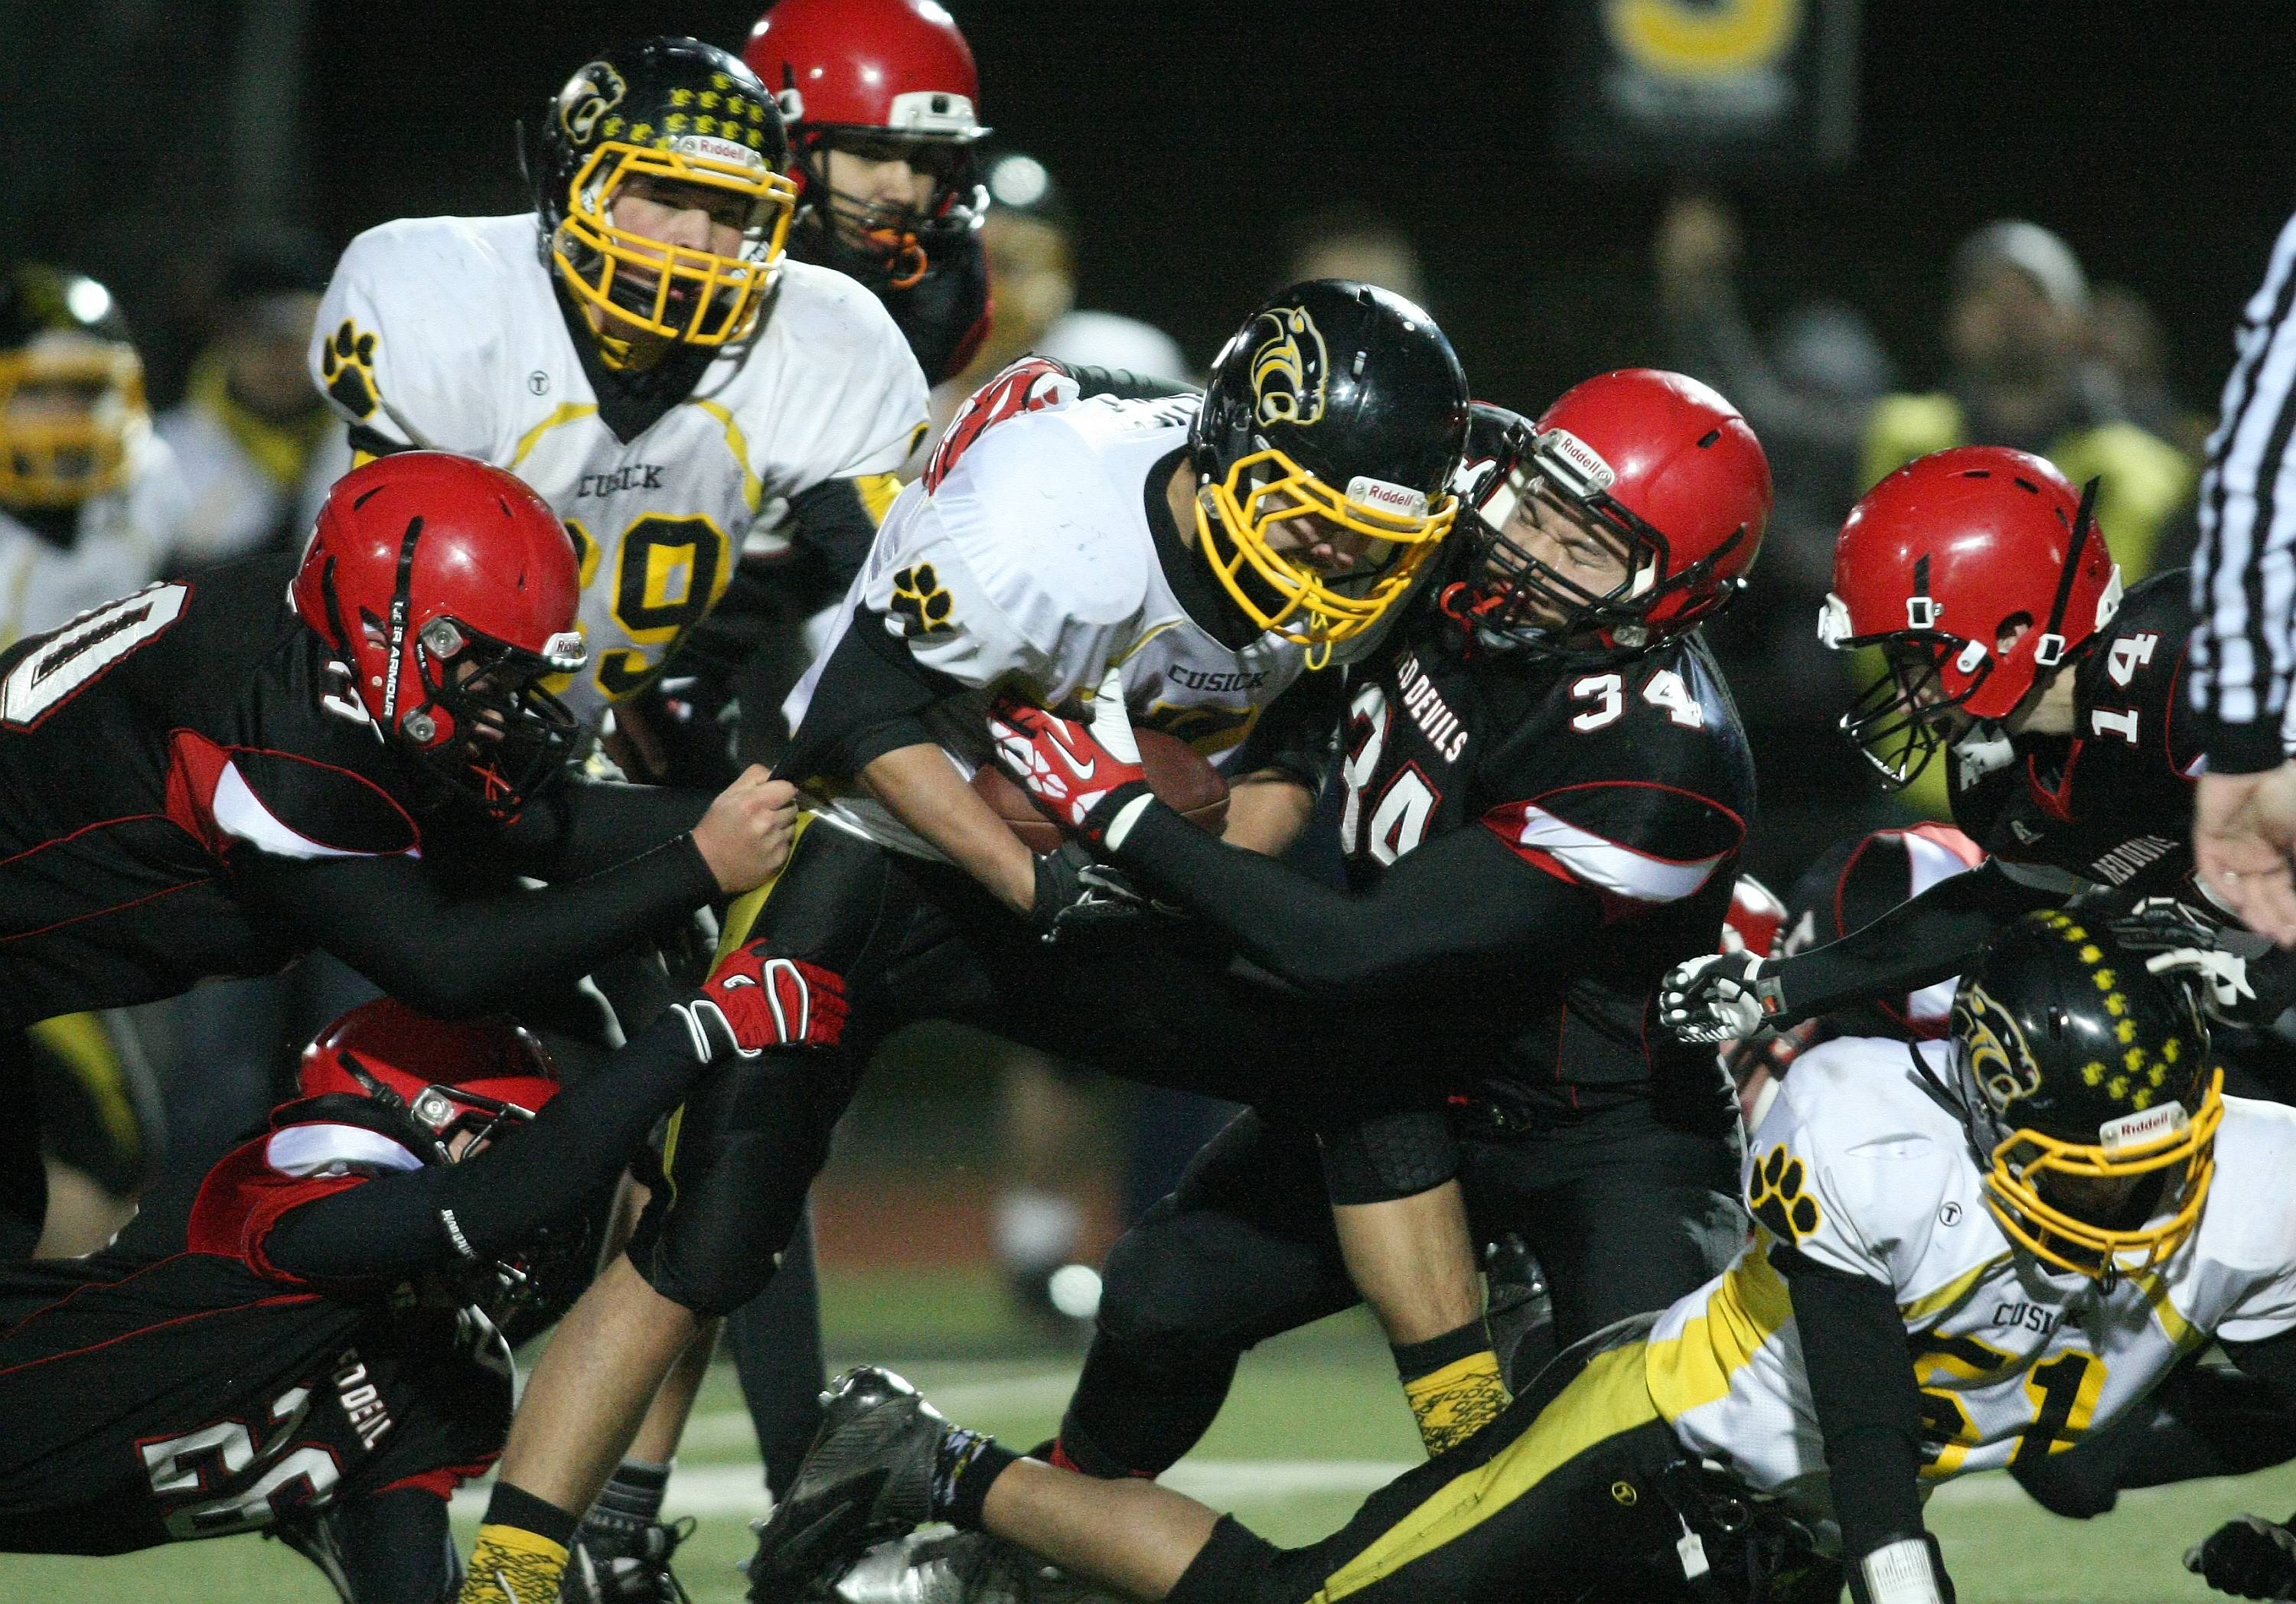 Neah Bay's John Reamer (34) teams with Bill Hanson (30) Ezekiel Greene (26) and Cameron Buzzell (14) to take down Cusick running back Alec Bluff. David Willoughby/for Peninsula Daily News